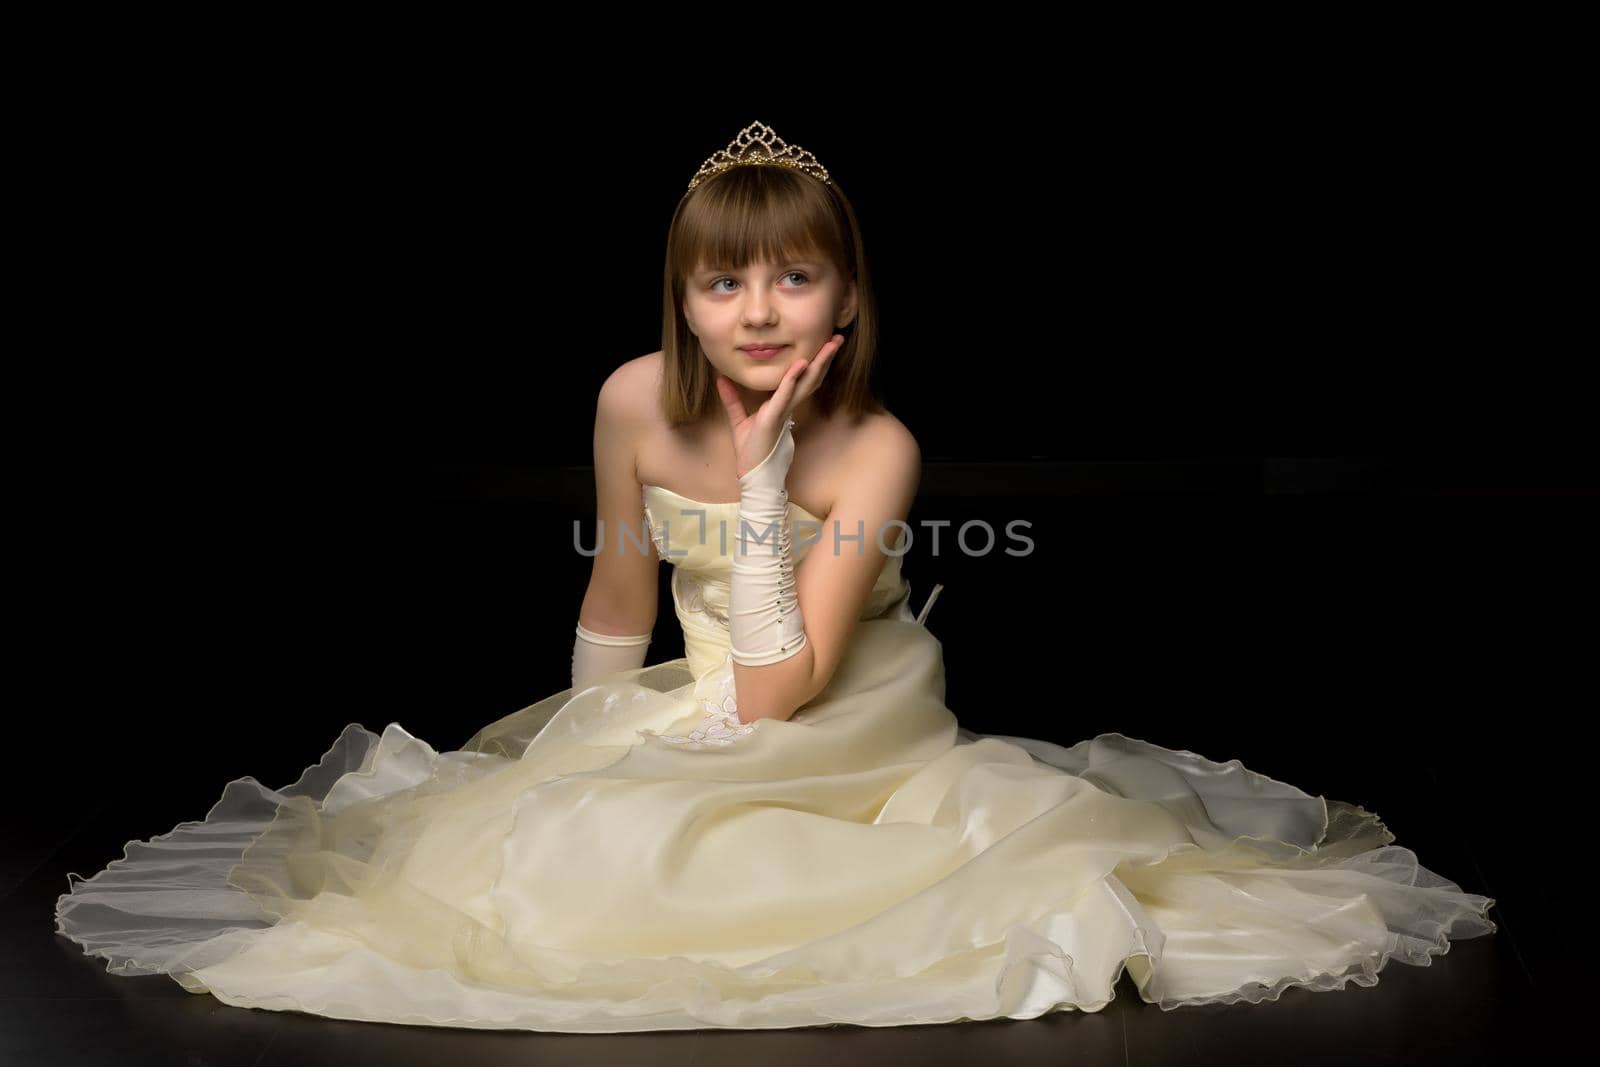 Beautiful little girl sitting in the studio on the floor on a black background. The concept of style and fashion.